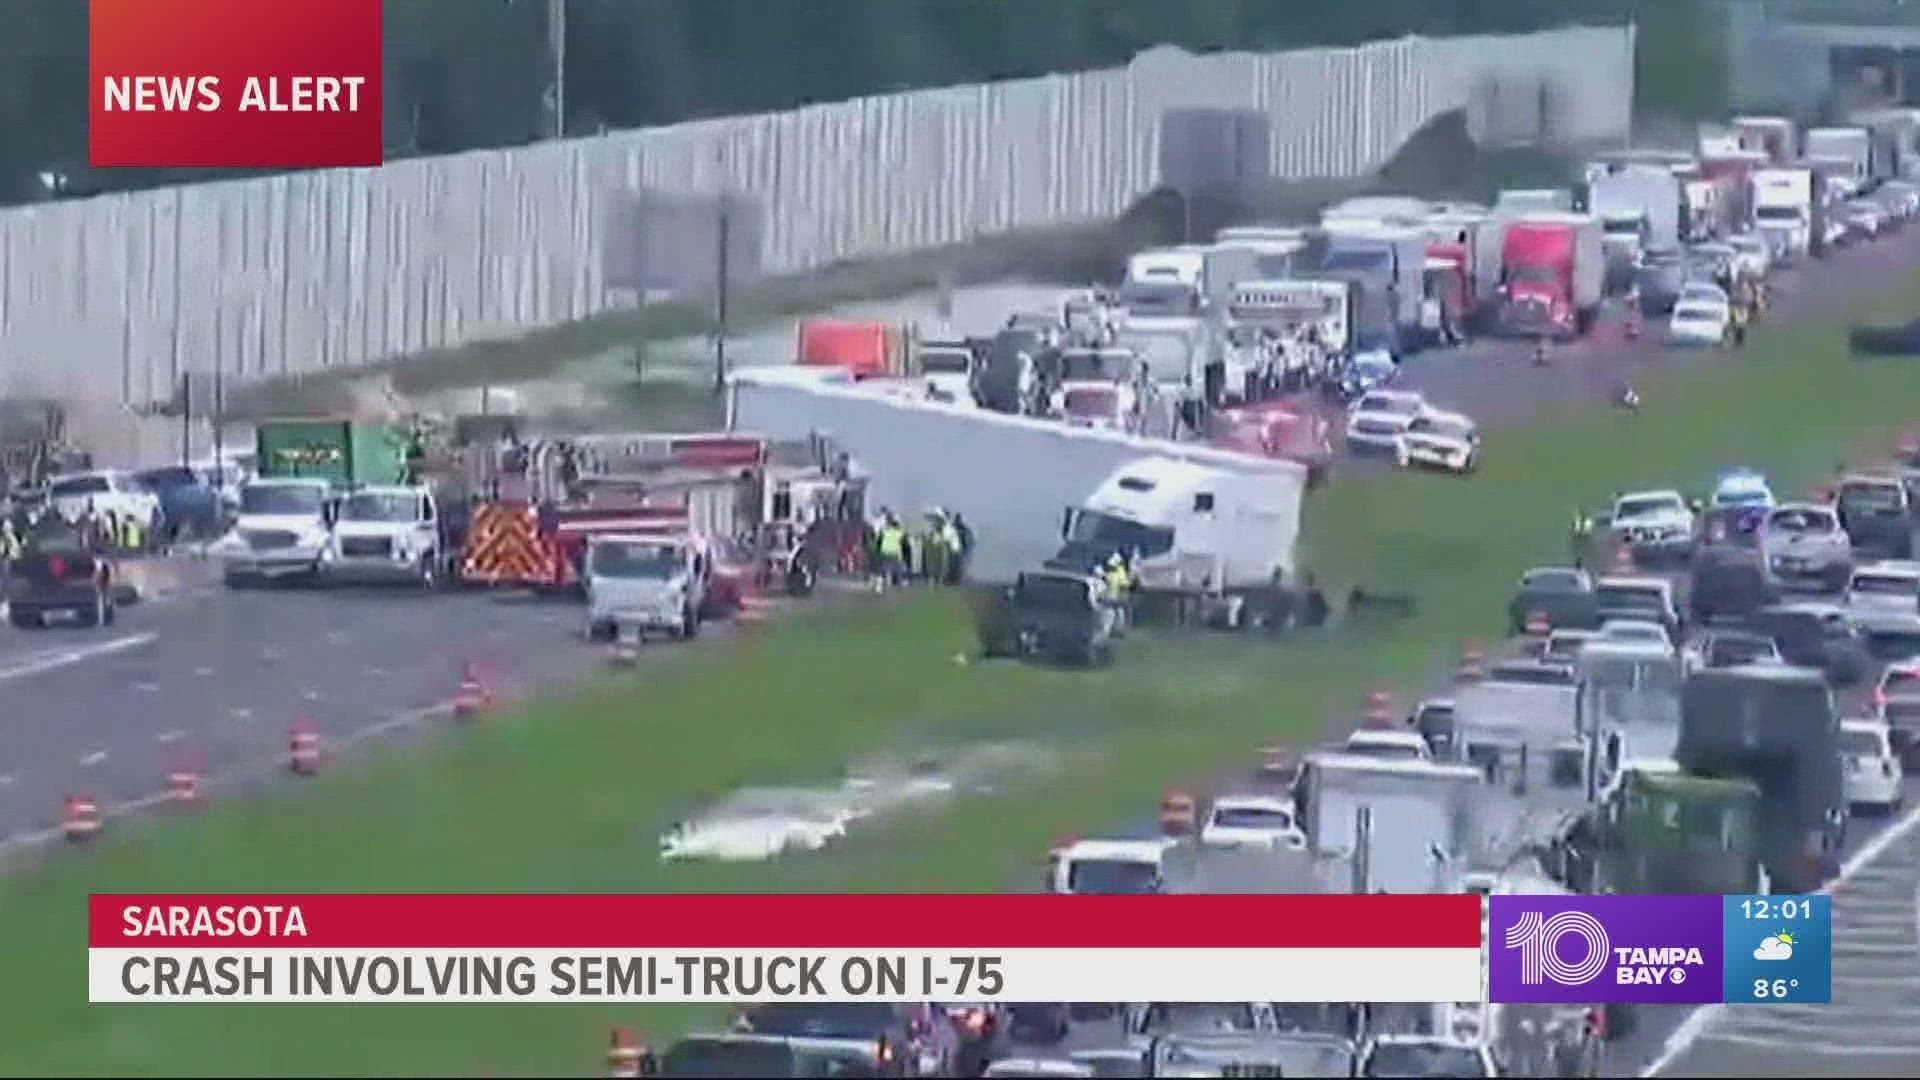 Florida Department of Transportation cameras shows the front of the semi-truck in the grassy median while the back is blocking lanes.